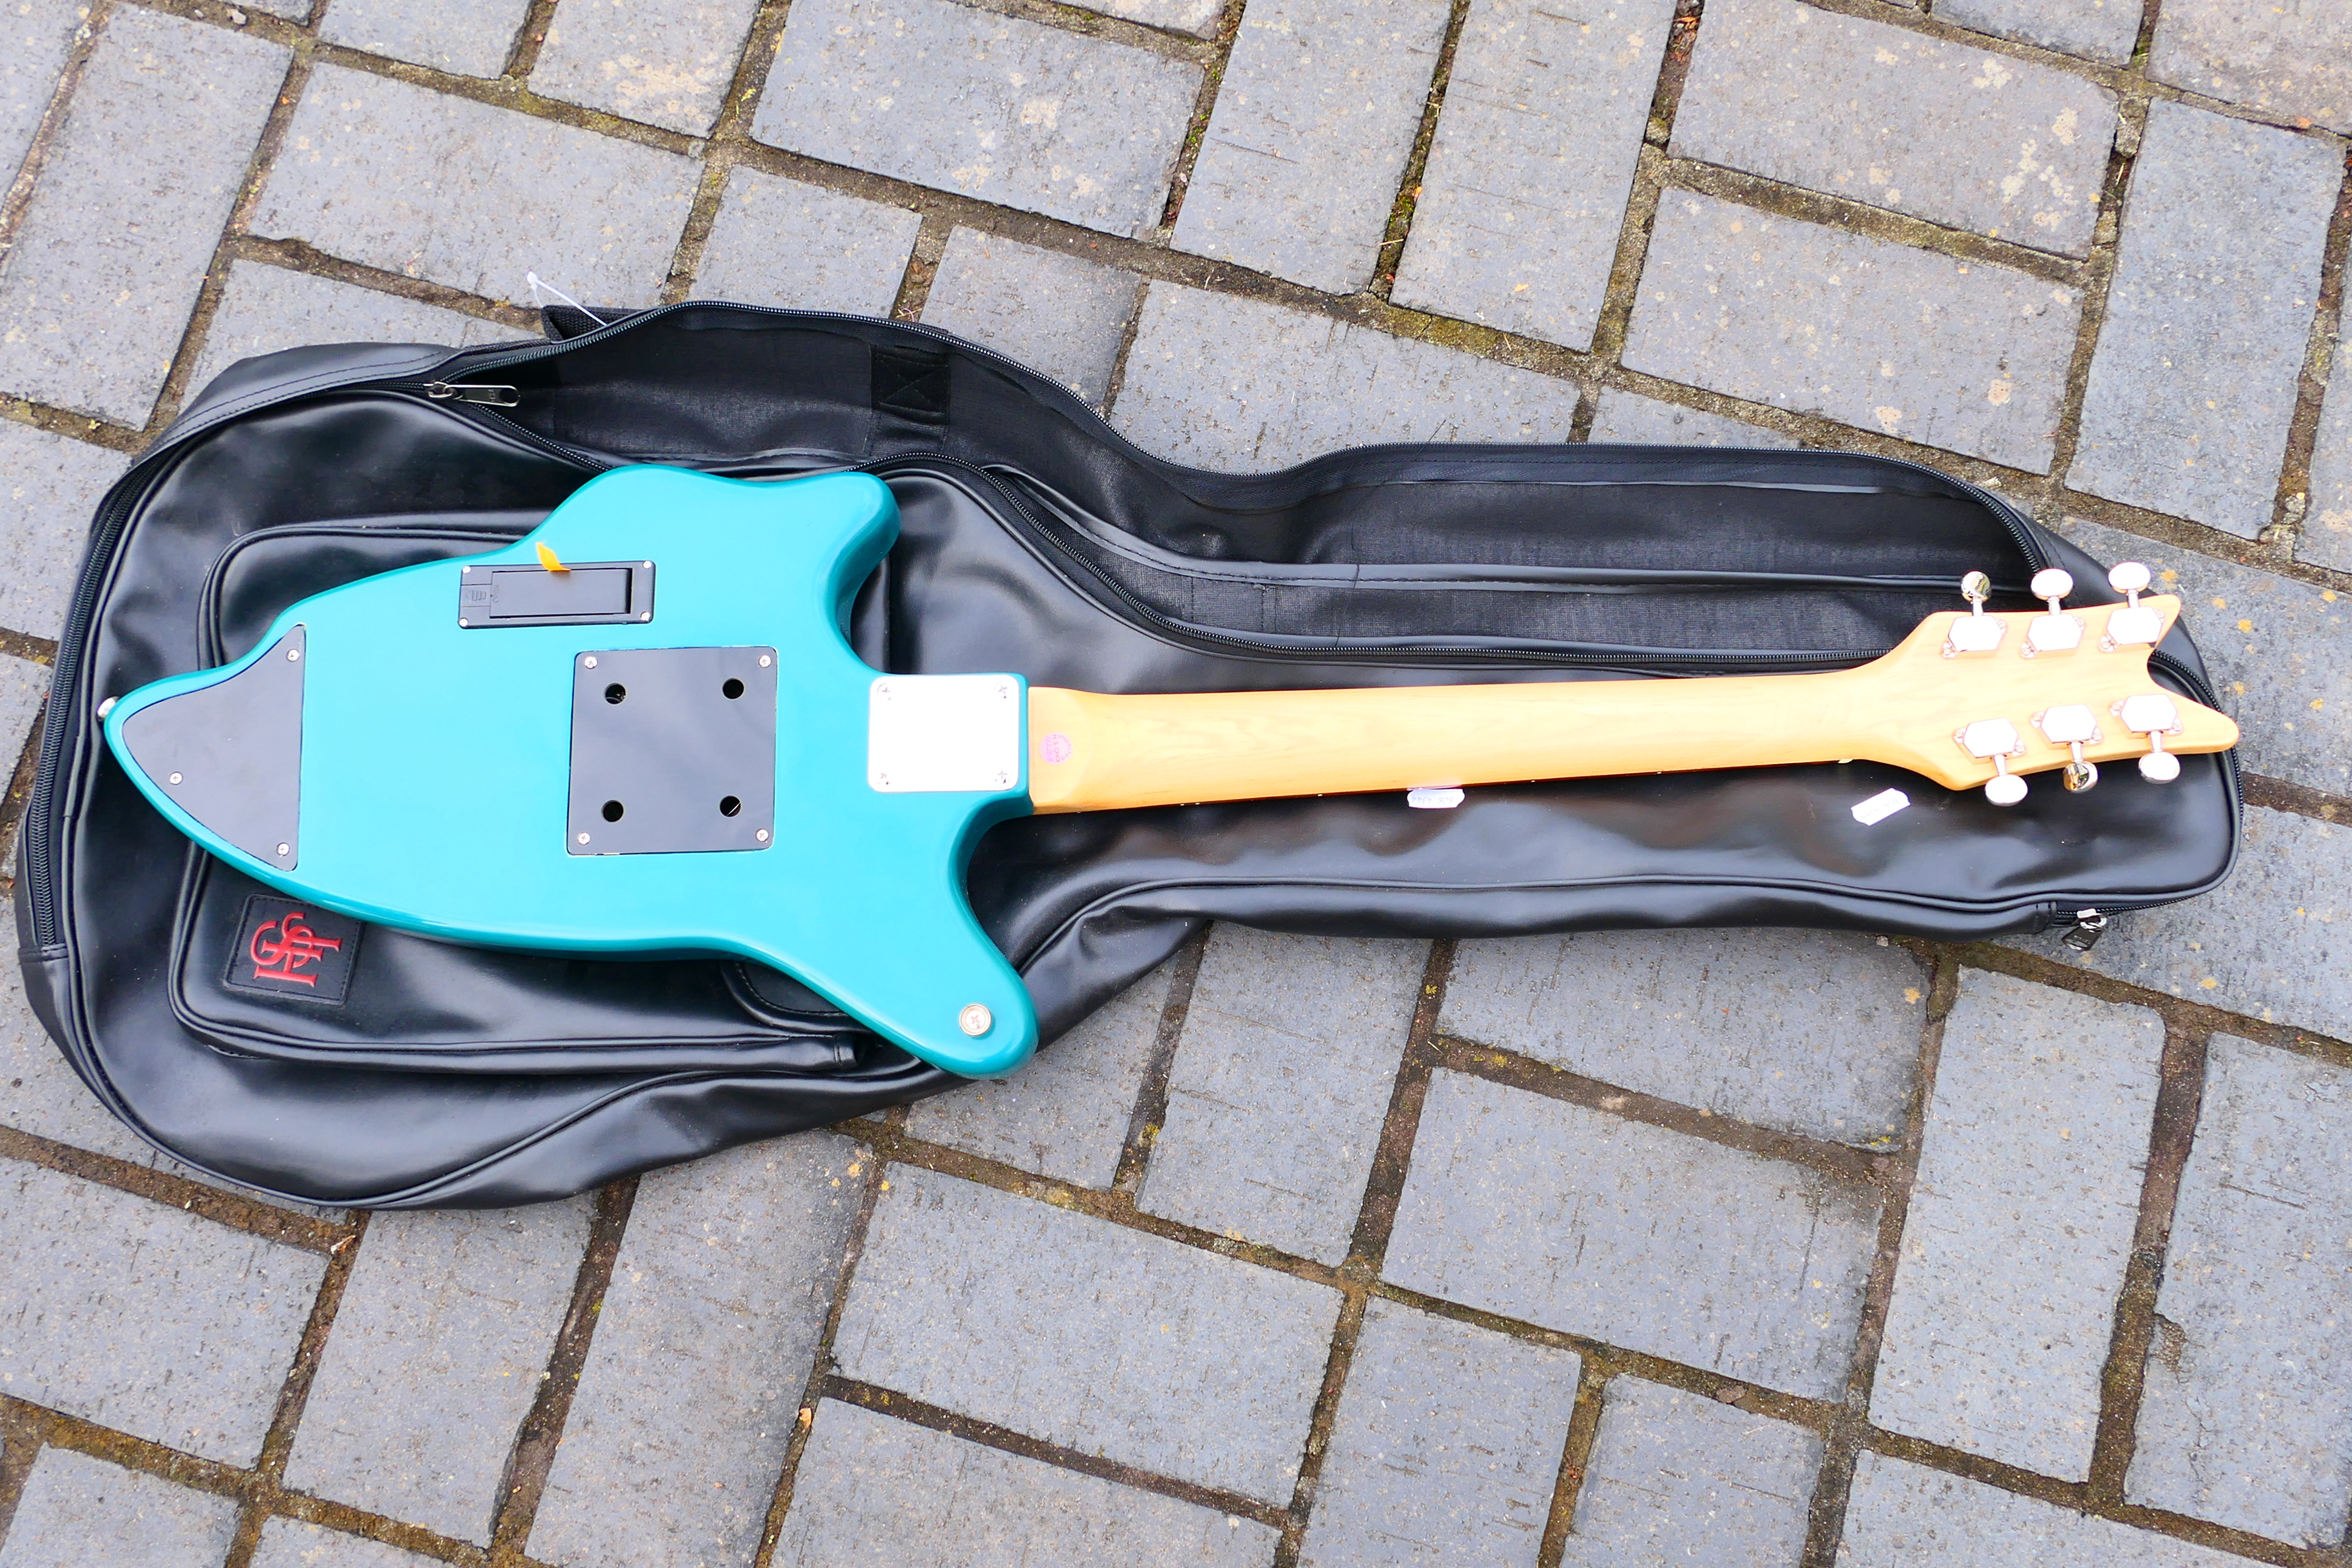 A Tanglewood Shark electric guitar, 3/4 scale with built in speaker contained in carry case. - Image 4 of 5